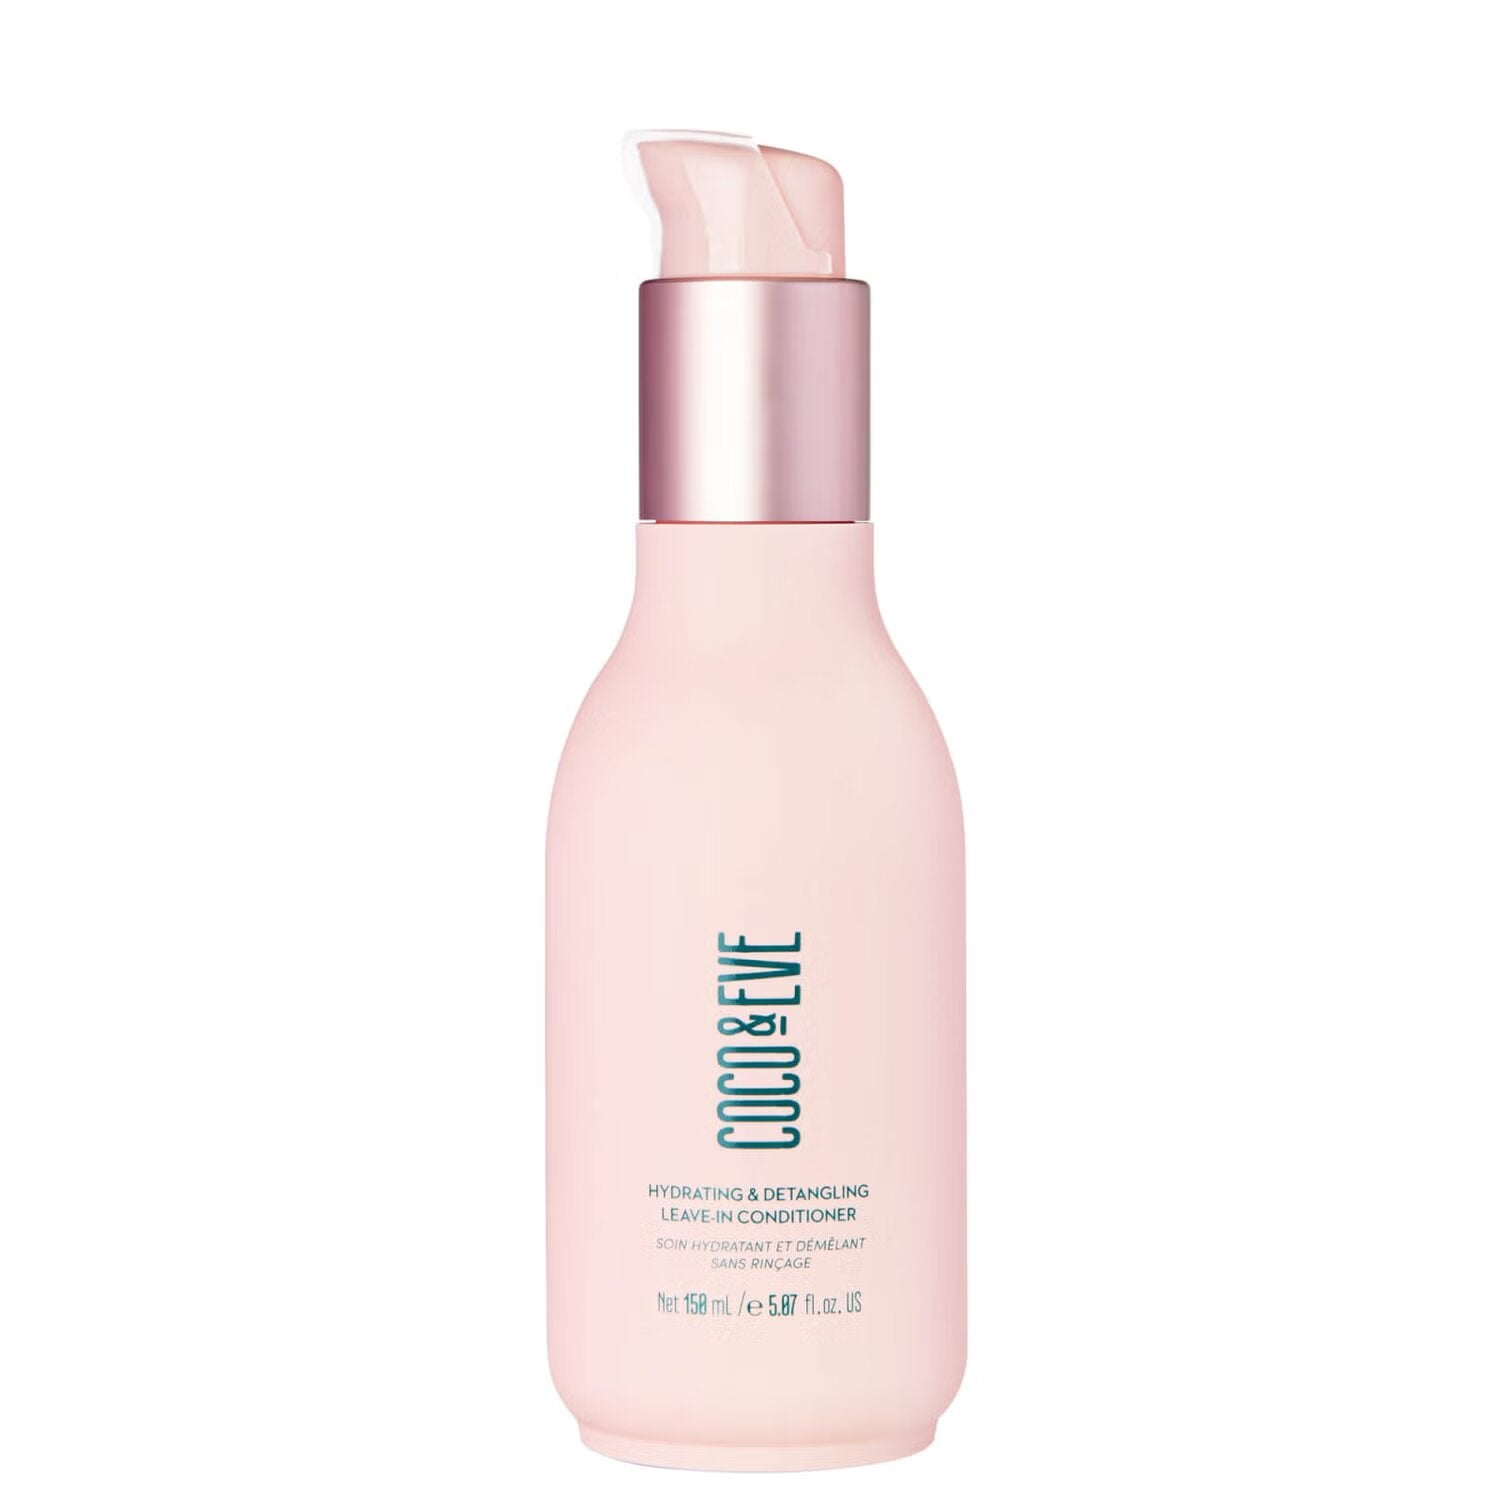 Coco & Eve Like A Virgin Hydrating and Detangling Leave-In Conditioner - 150ml